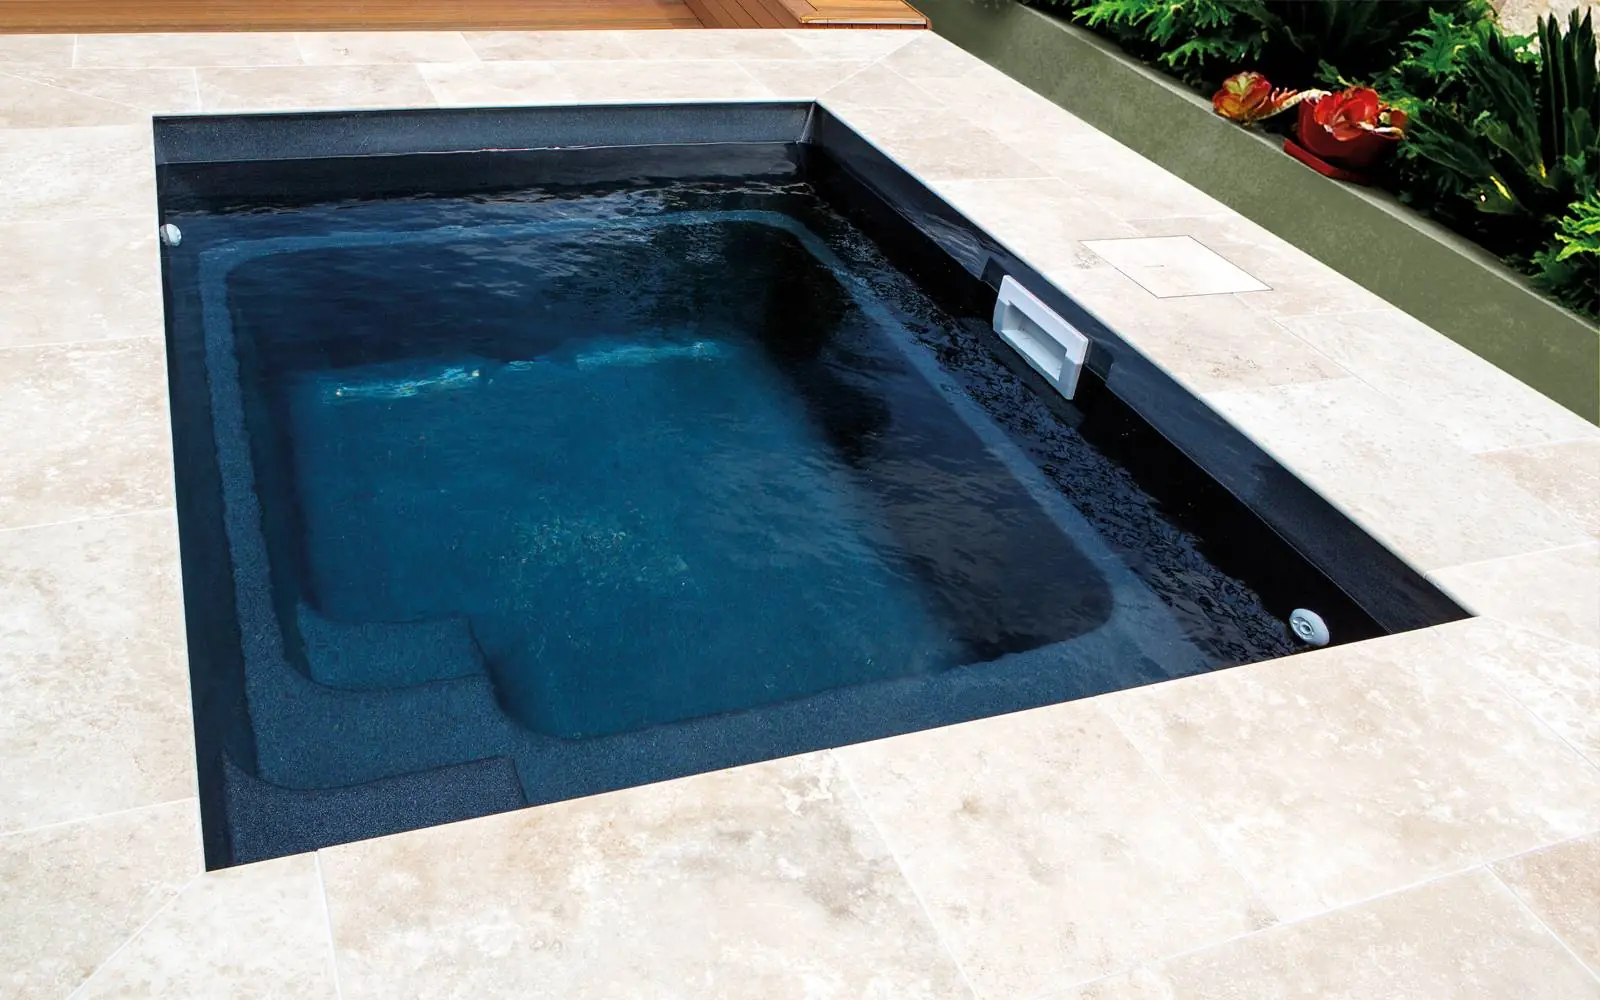 The Fiji Plunge, a fiberglass plunge pool by Leisure Pools